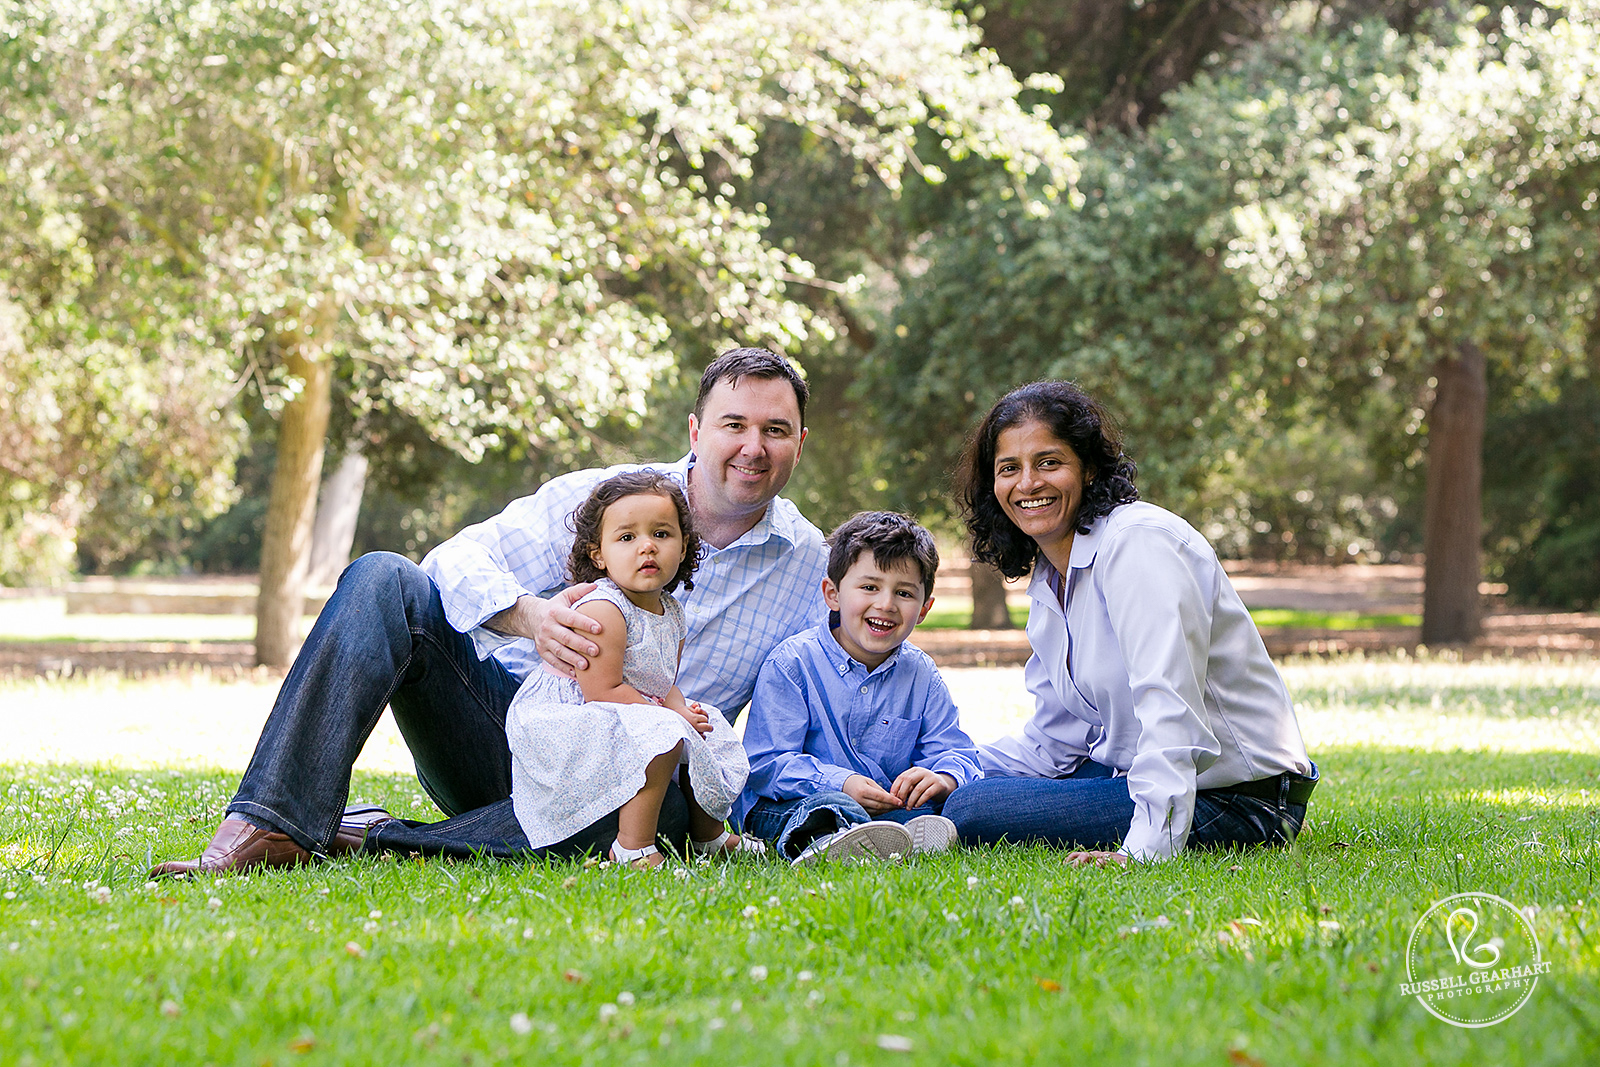 Southern California Garden Family Portrait – Russell Gearhart Photography – www.gearhartphoto.com